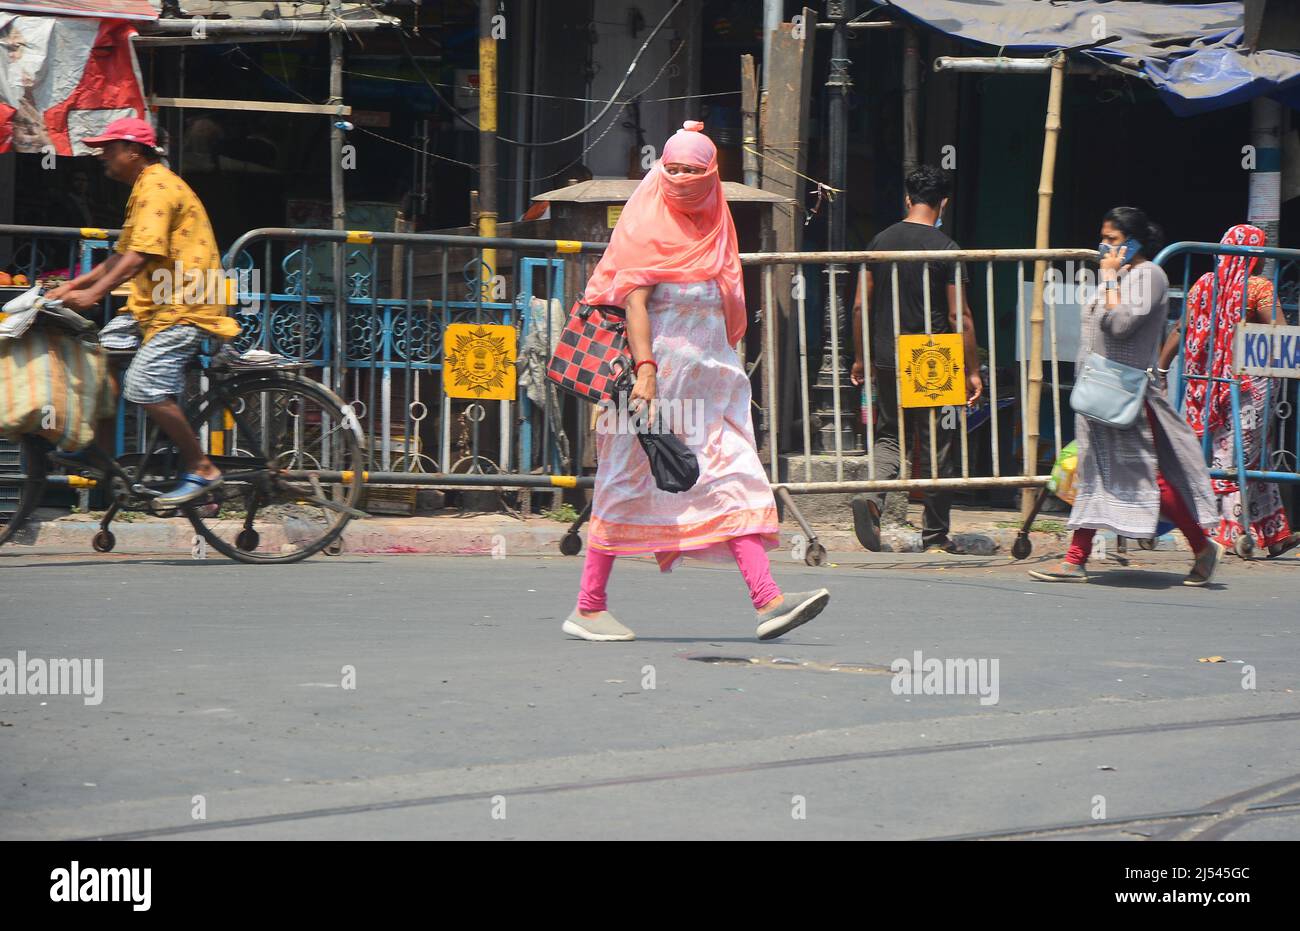 Kolkata, India. 18th Apr, 2022. A woman came outside on a hot summer day in Kolkata. With hot and humid weather, Kolkata on Monday recorded the maximum and minimum temperatures at 36 and 29 degrees Celsius respectively. (Photo by Rahul Sadhukhan/Pacific Press) Credit: Pacific Press Media Production Corp./Alamy Live News Stock Photo